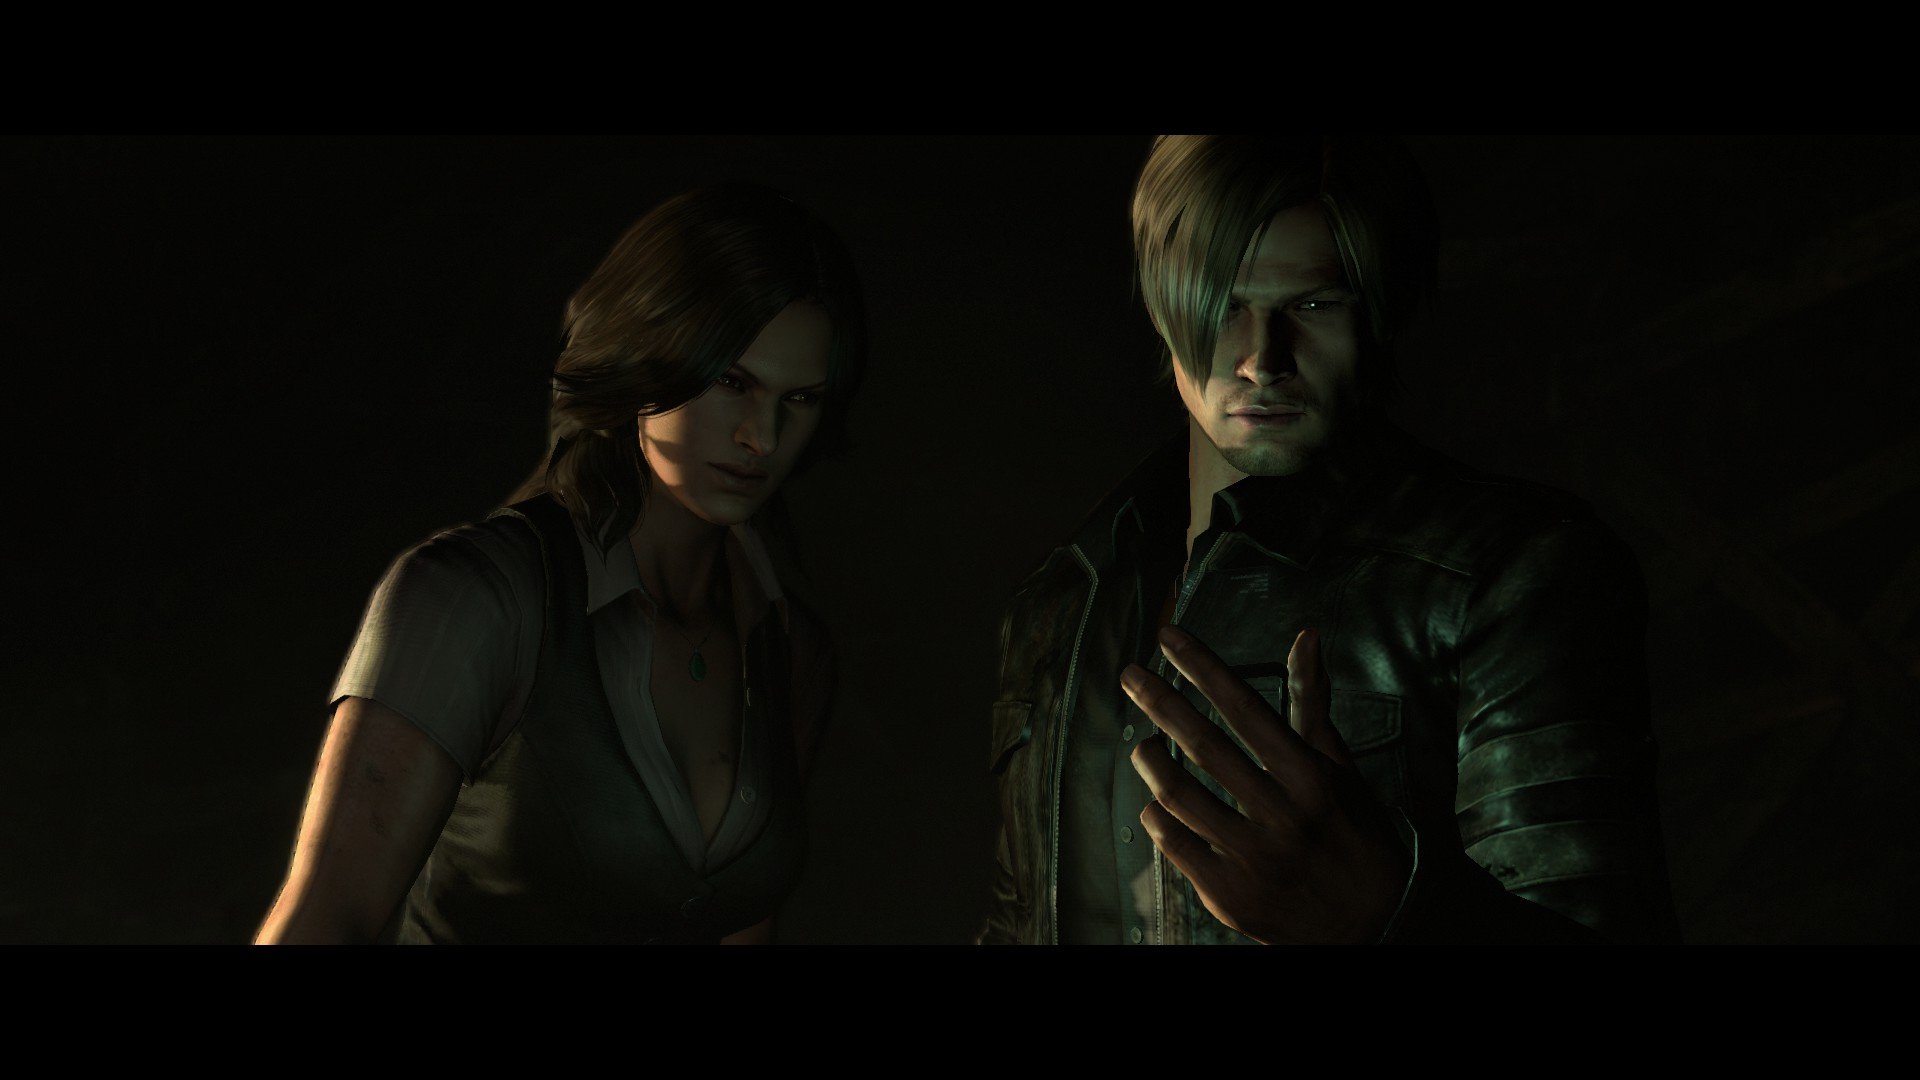 resident evil 6 hd pc version free download for windows 10